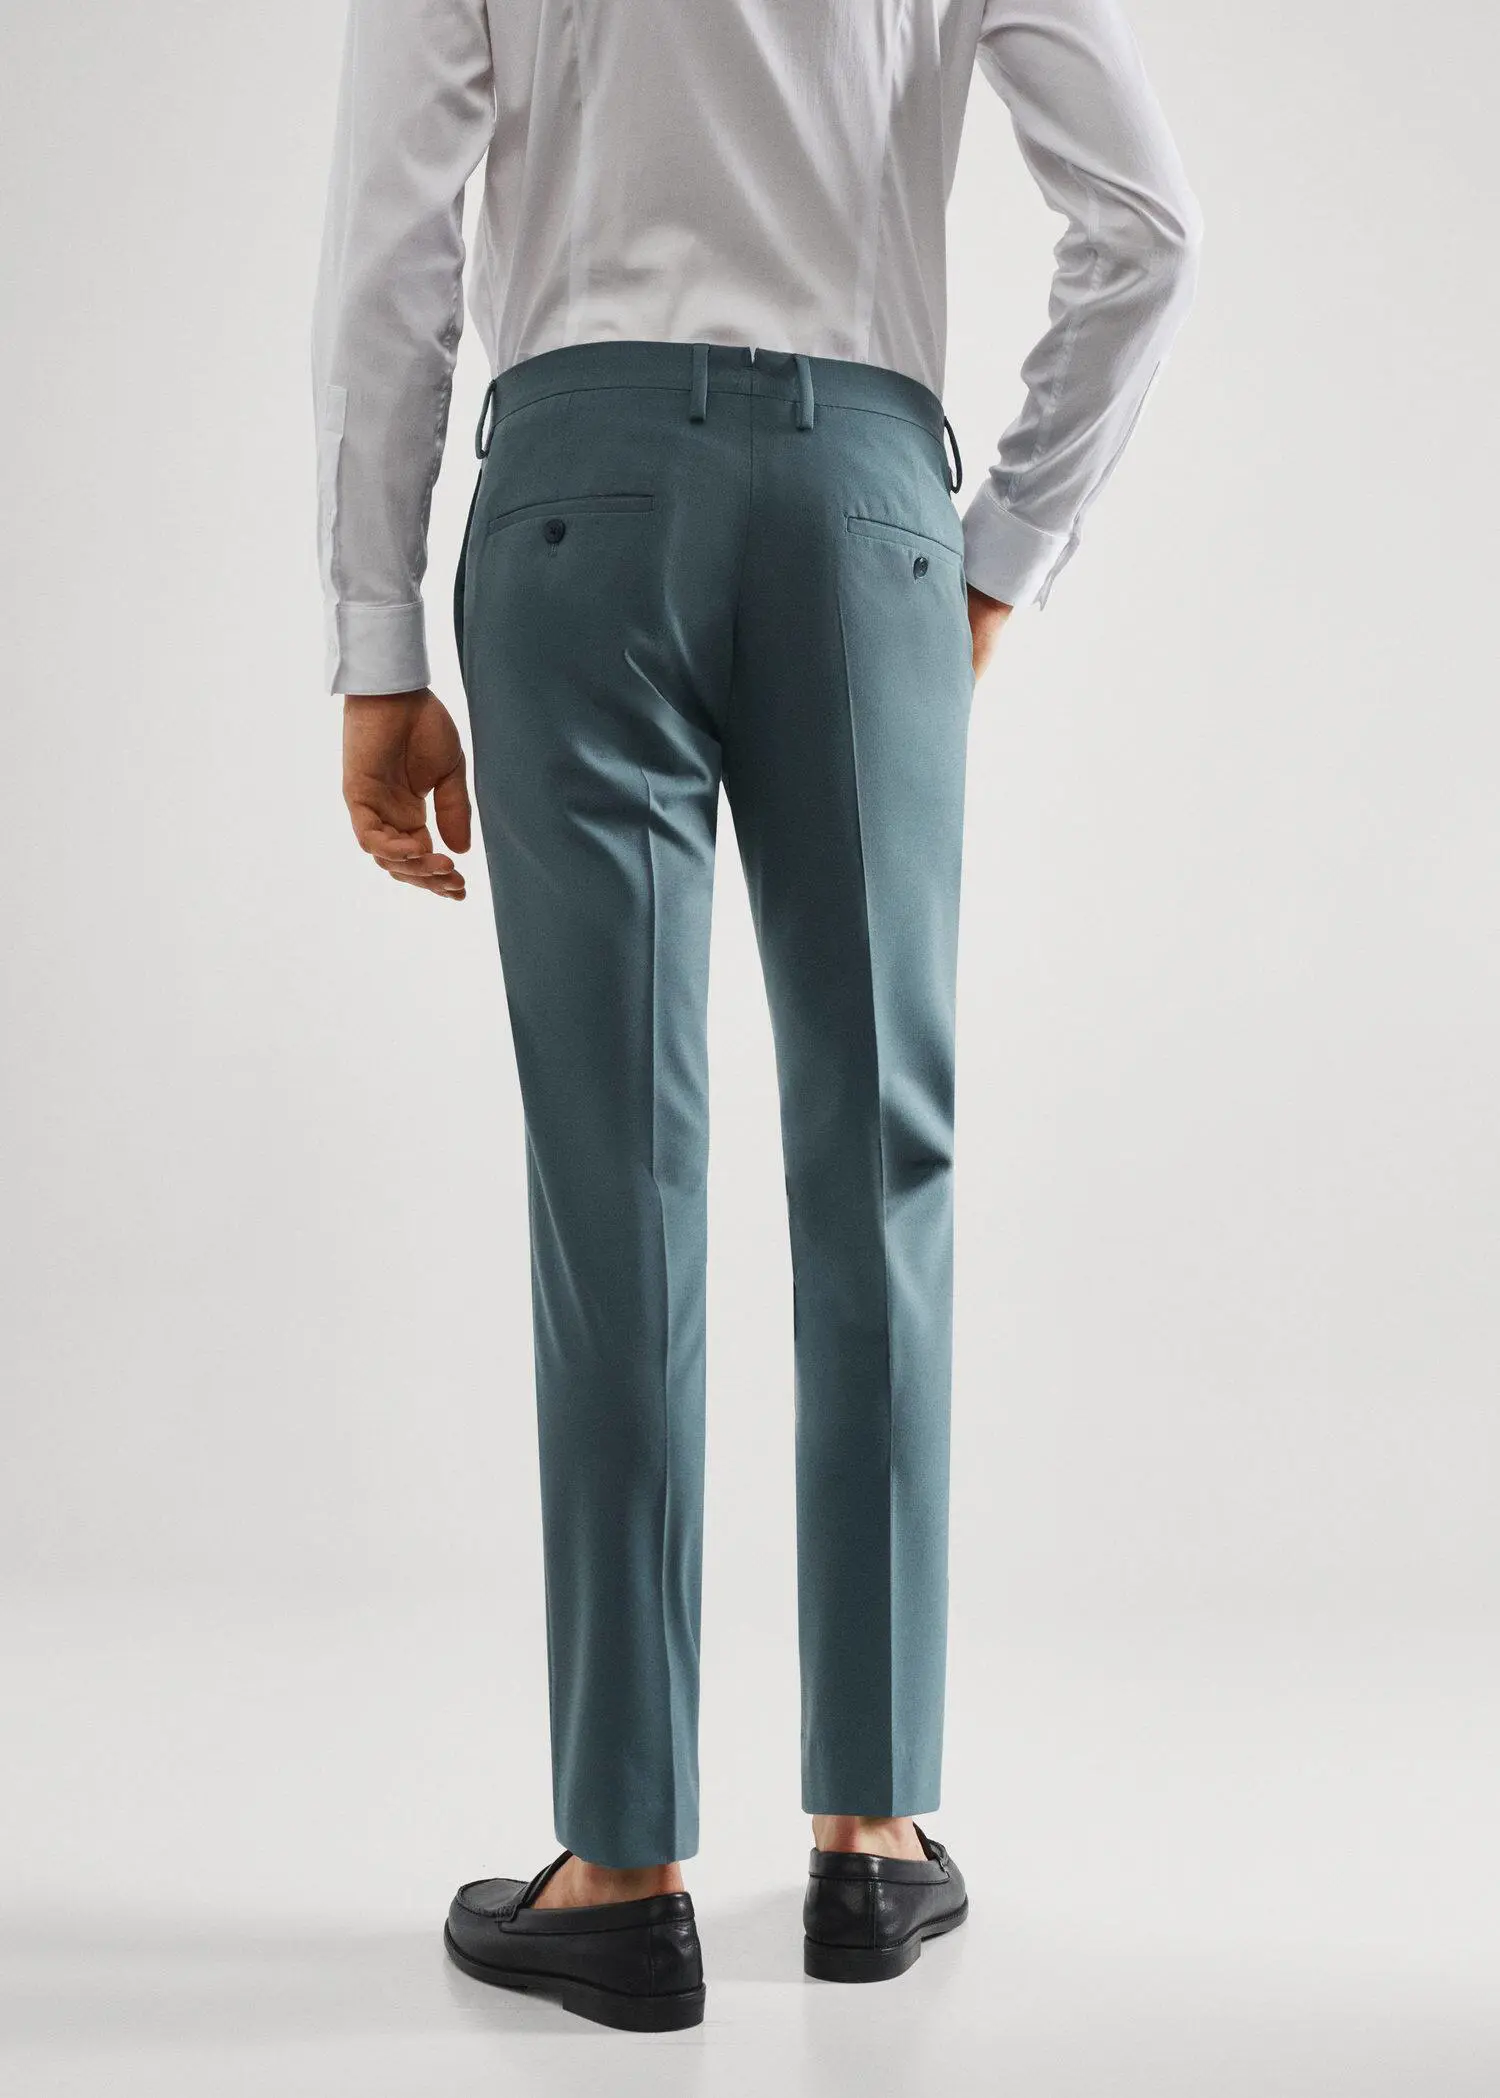 Mango Stretch fabric super slim-fit suit pants. a man wearing a suit standing in front of a white wall. 